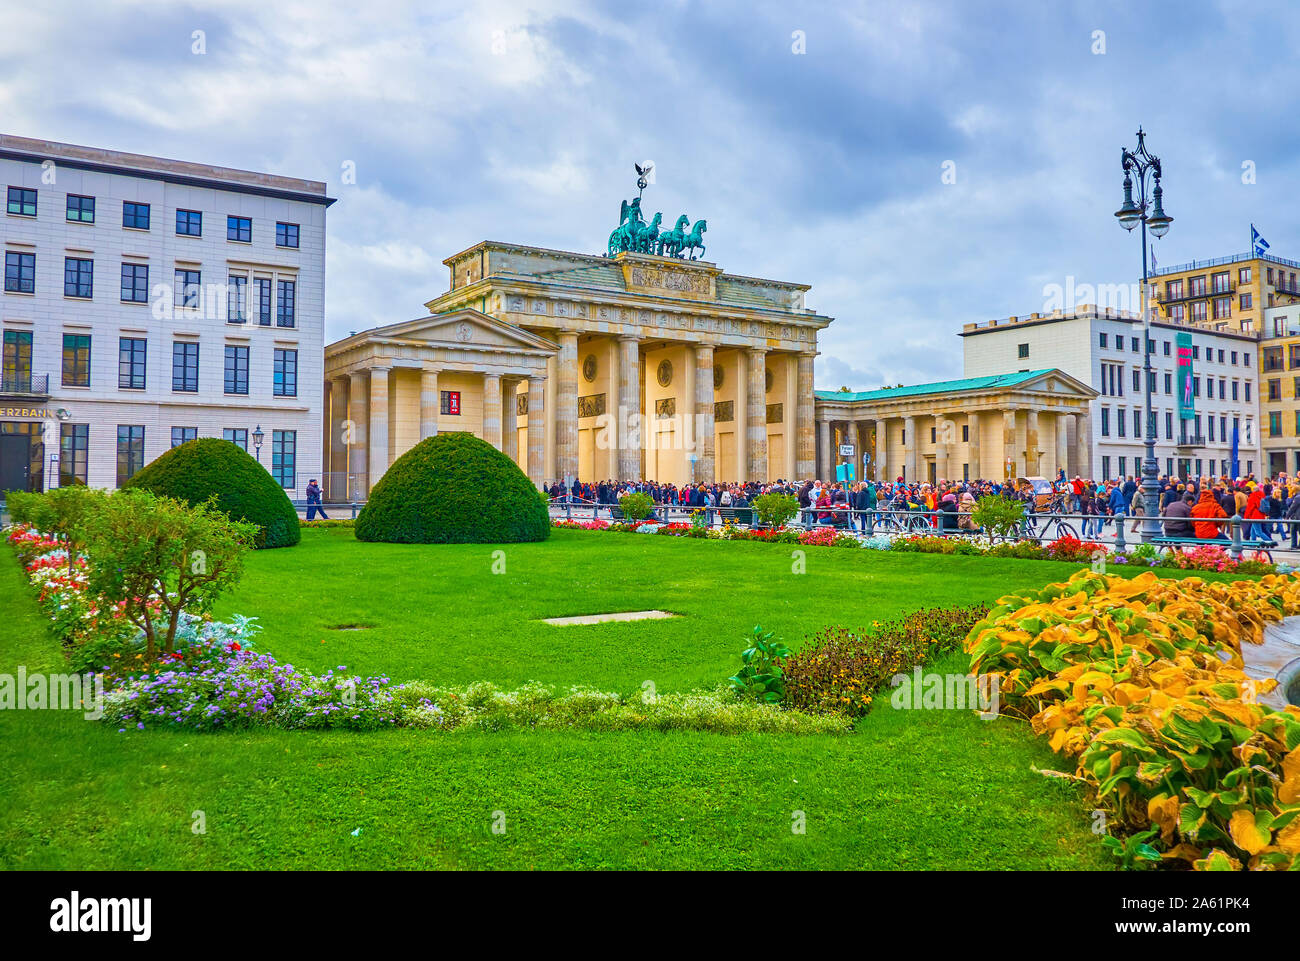 BERLIN, GERMANY - OCTOBER 3, 2019: The view on magnificent Brandenburg Gate through the fountain's flowerbed on Pariser Platz, on October 3 in Berlin Stock Photo